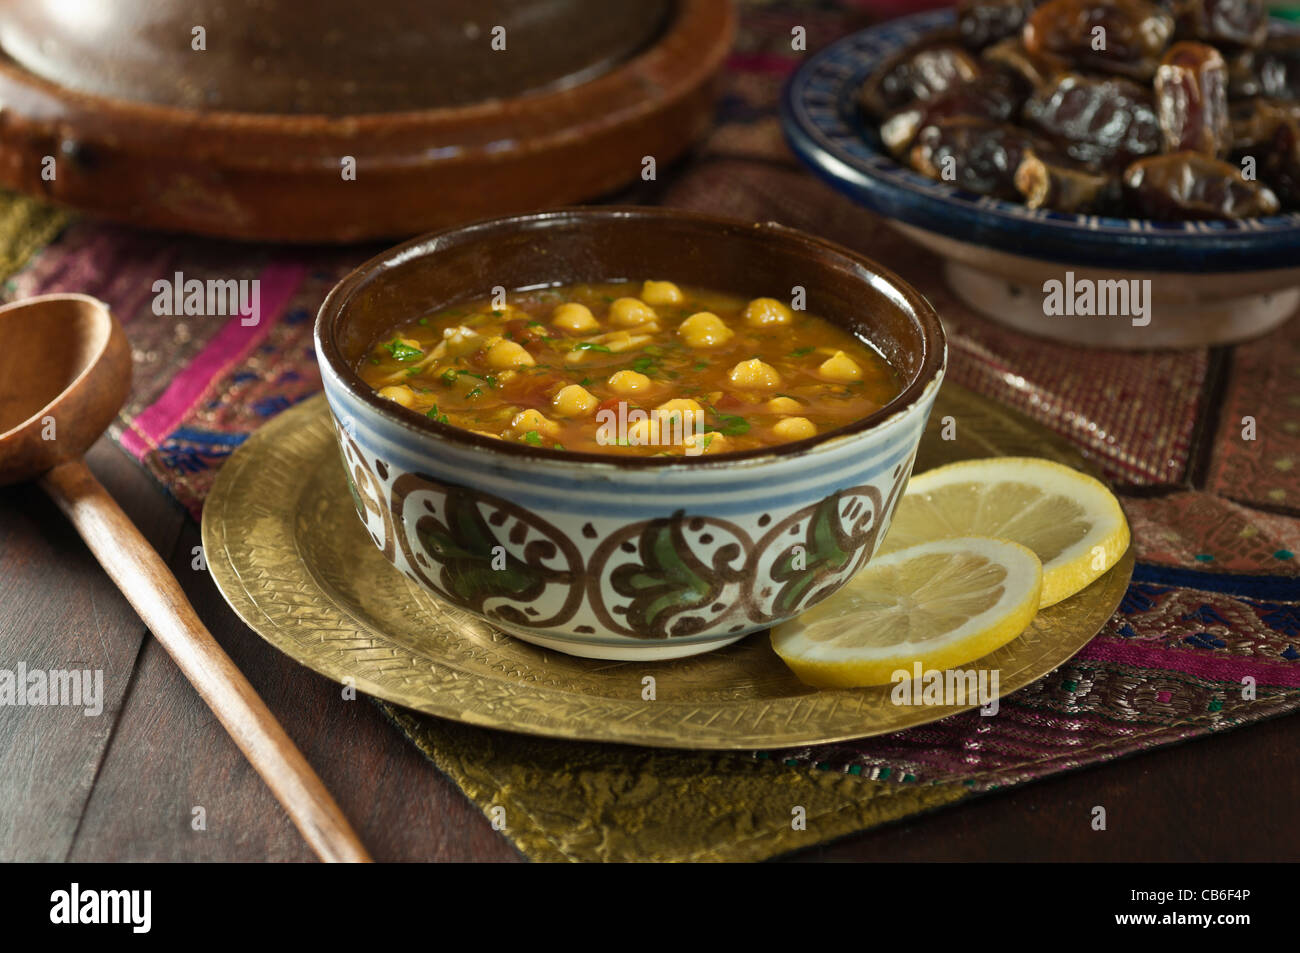 Harira. Traditional Moroccan lentil and chickpea soup Stock Photo